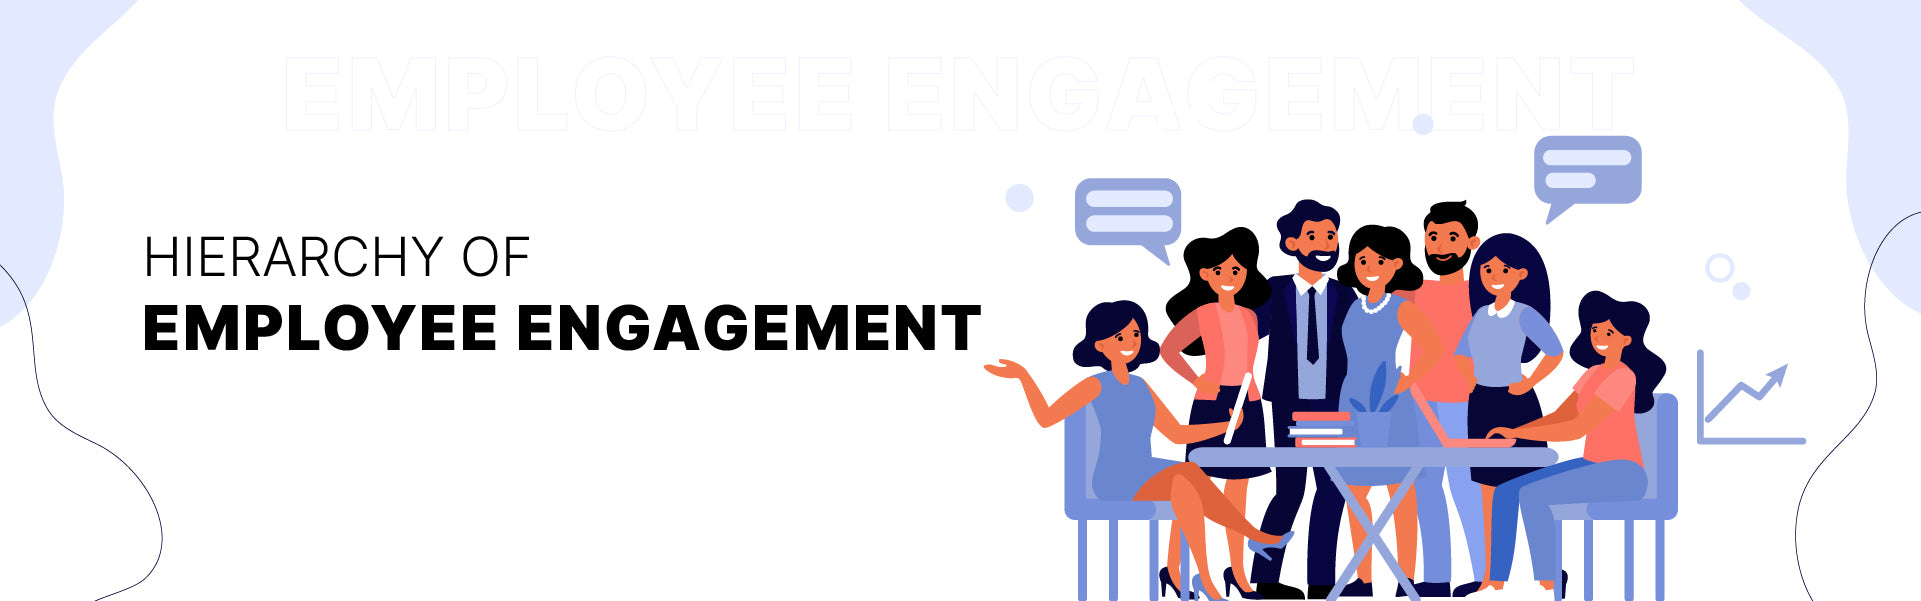 Hierarchy of Employee Engagement.